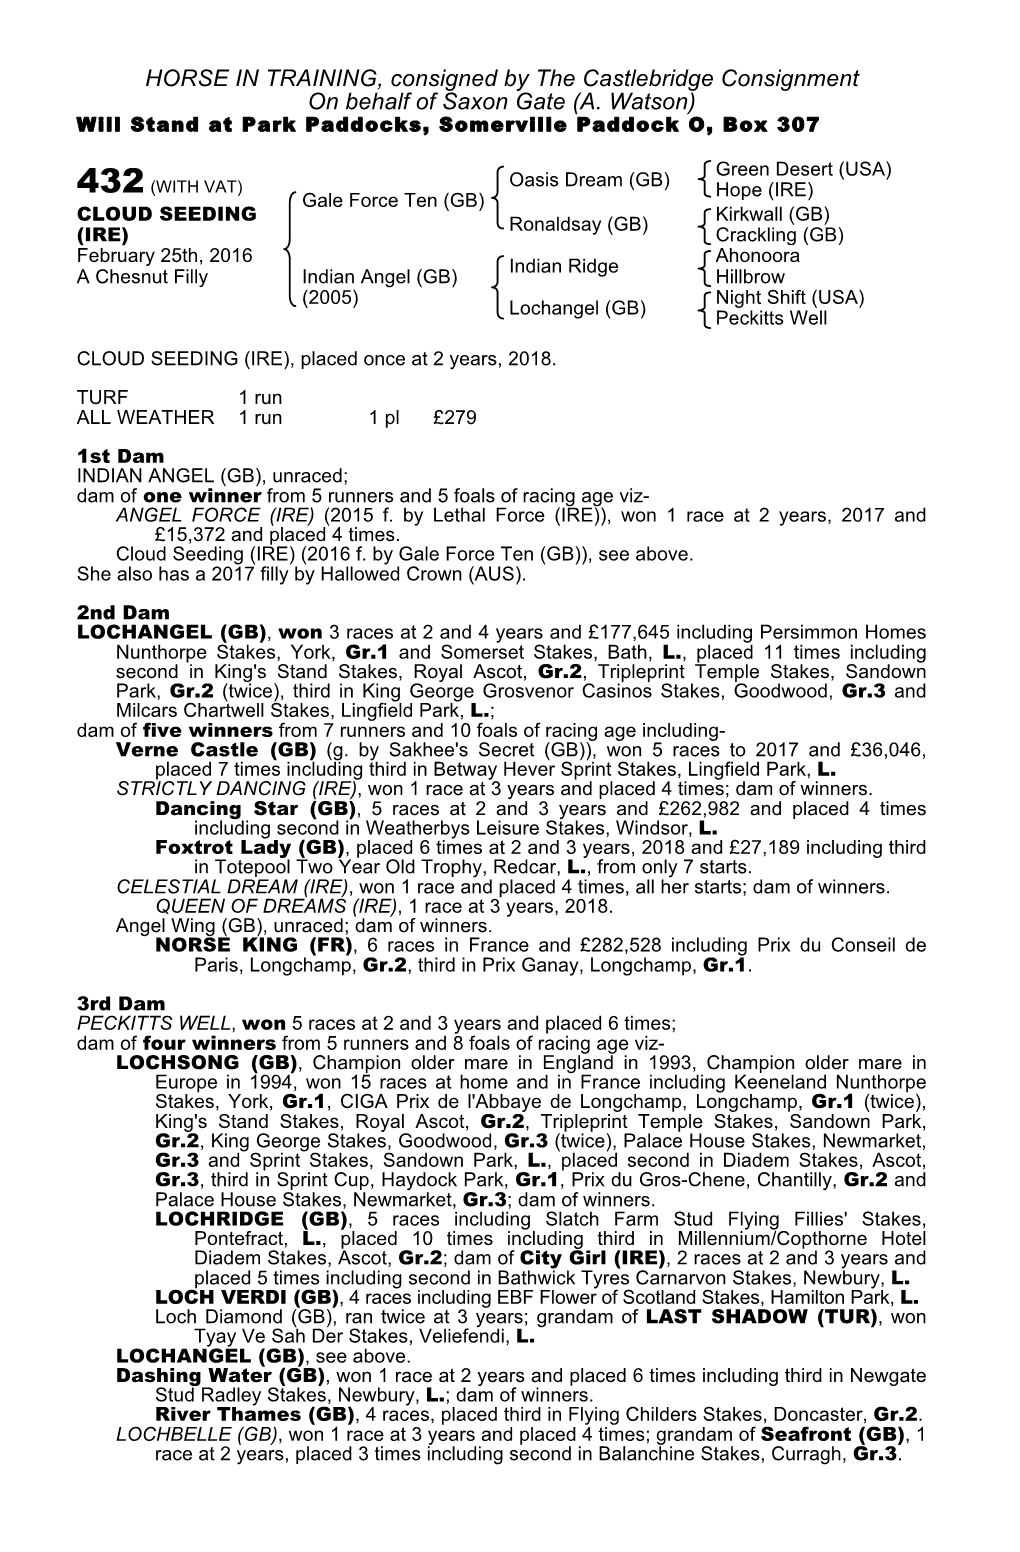 HORSE in TRAINING, Consigned by the Castlebridge Consignment on Behalf of Saxon Gate (A